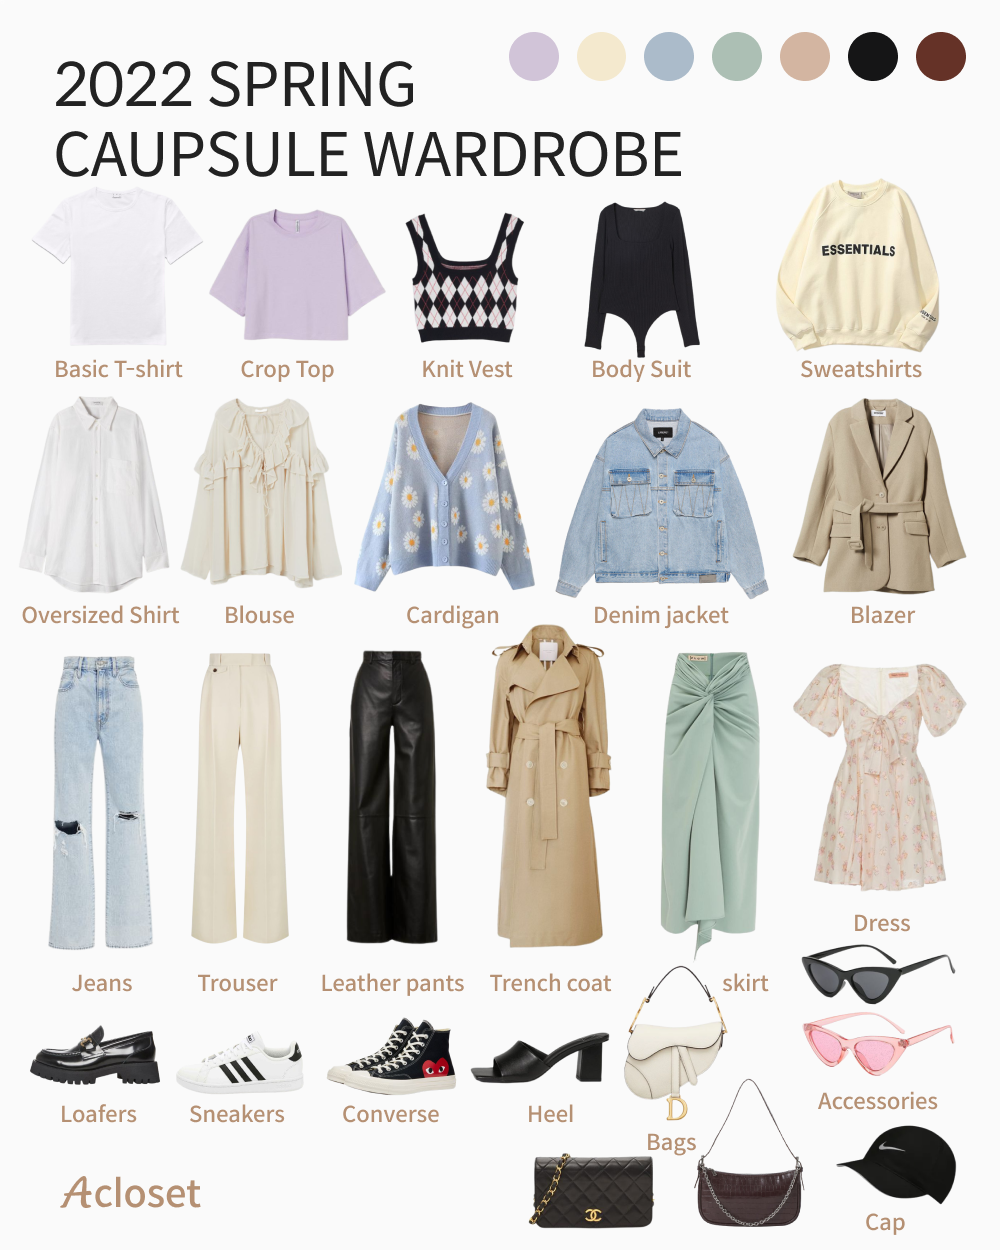 How to Build a Spring Capsule Wardrobe 2022 ver, by Team Acloset